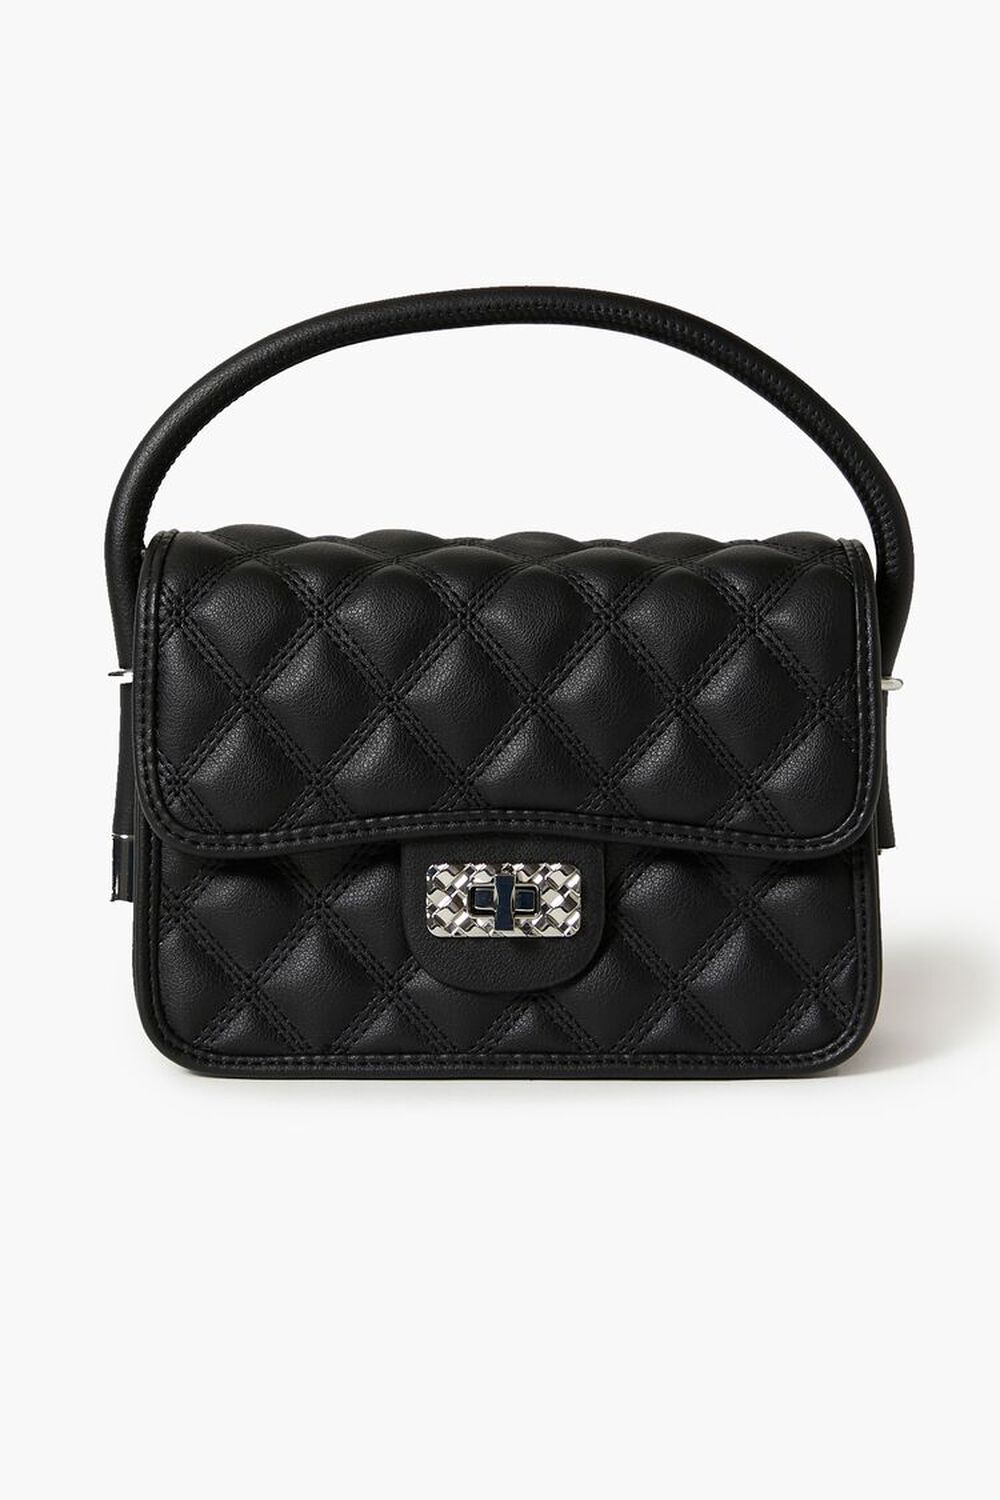 Forever 21 Women's Faux Leather/Pleather Quilted Crossbody Bag in Black | Date Night, Clubbing, Party Clothes | F21